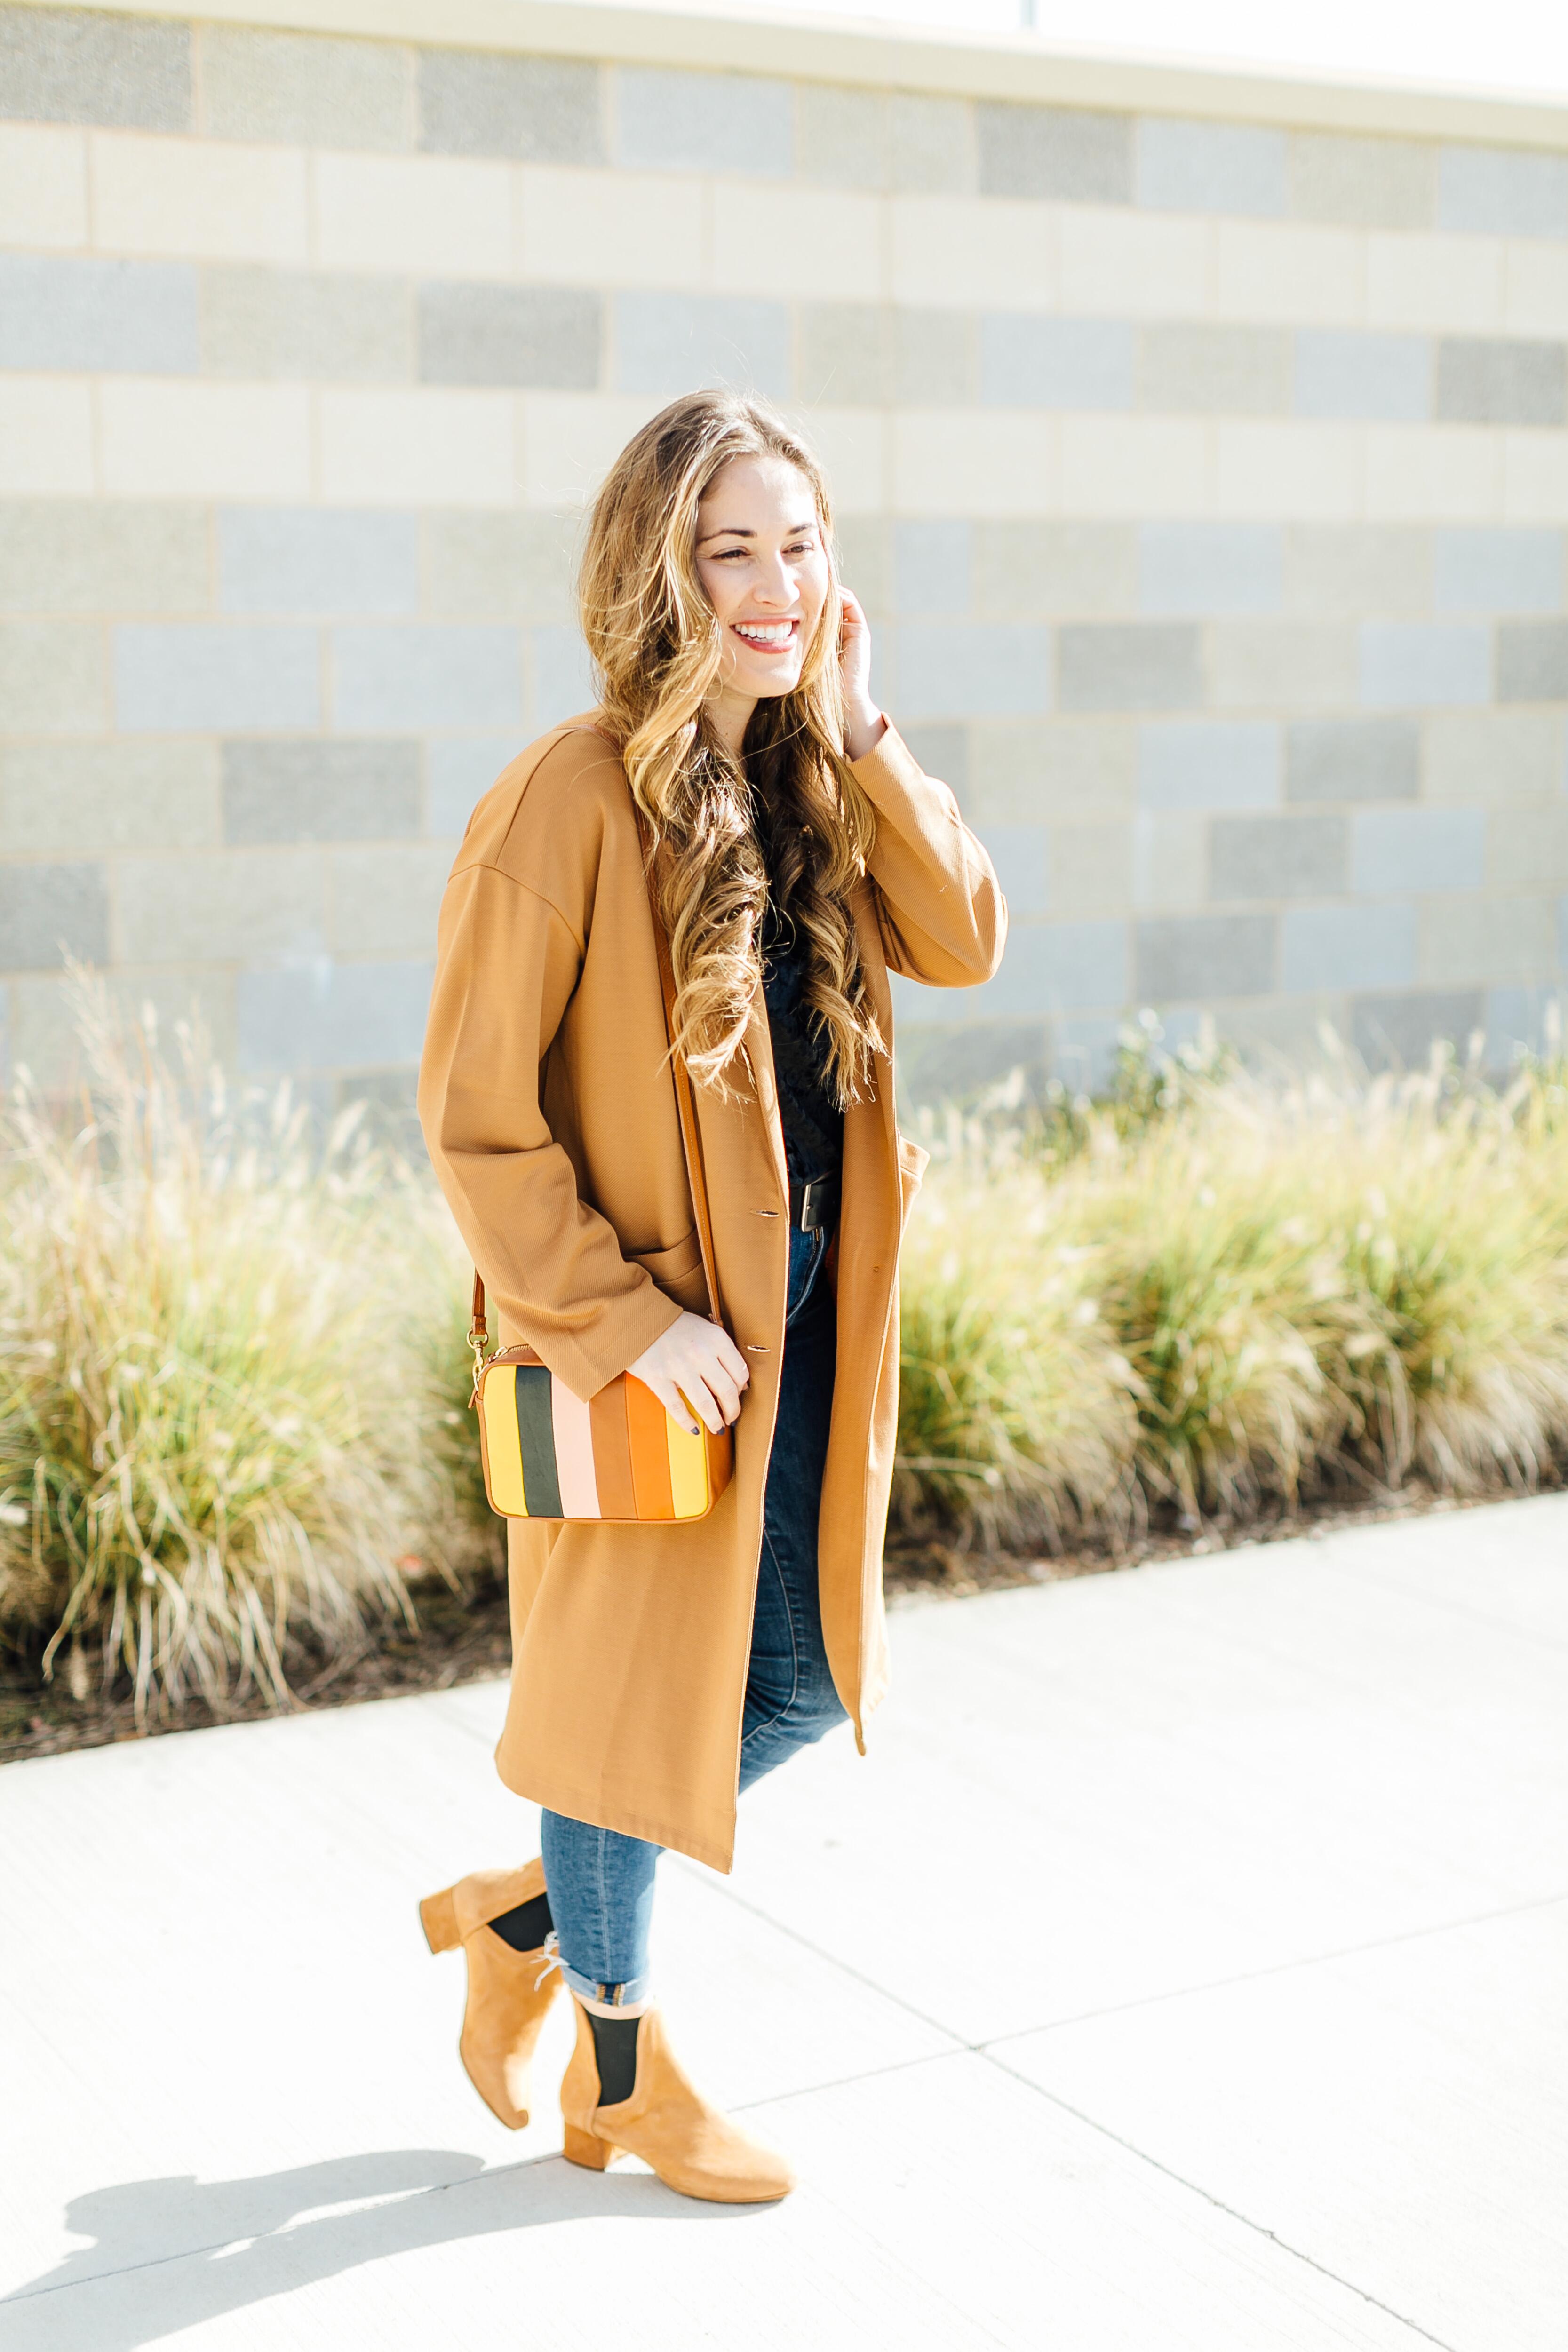 How to Wear a Longline Coat by East Memphis style blogger Walking in Memphis in High Heels